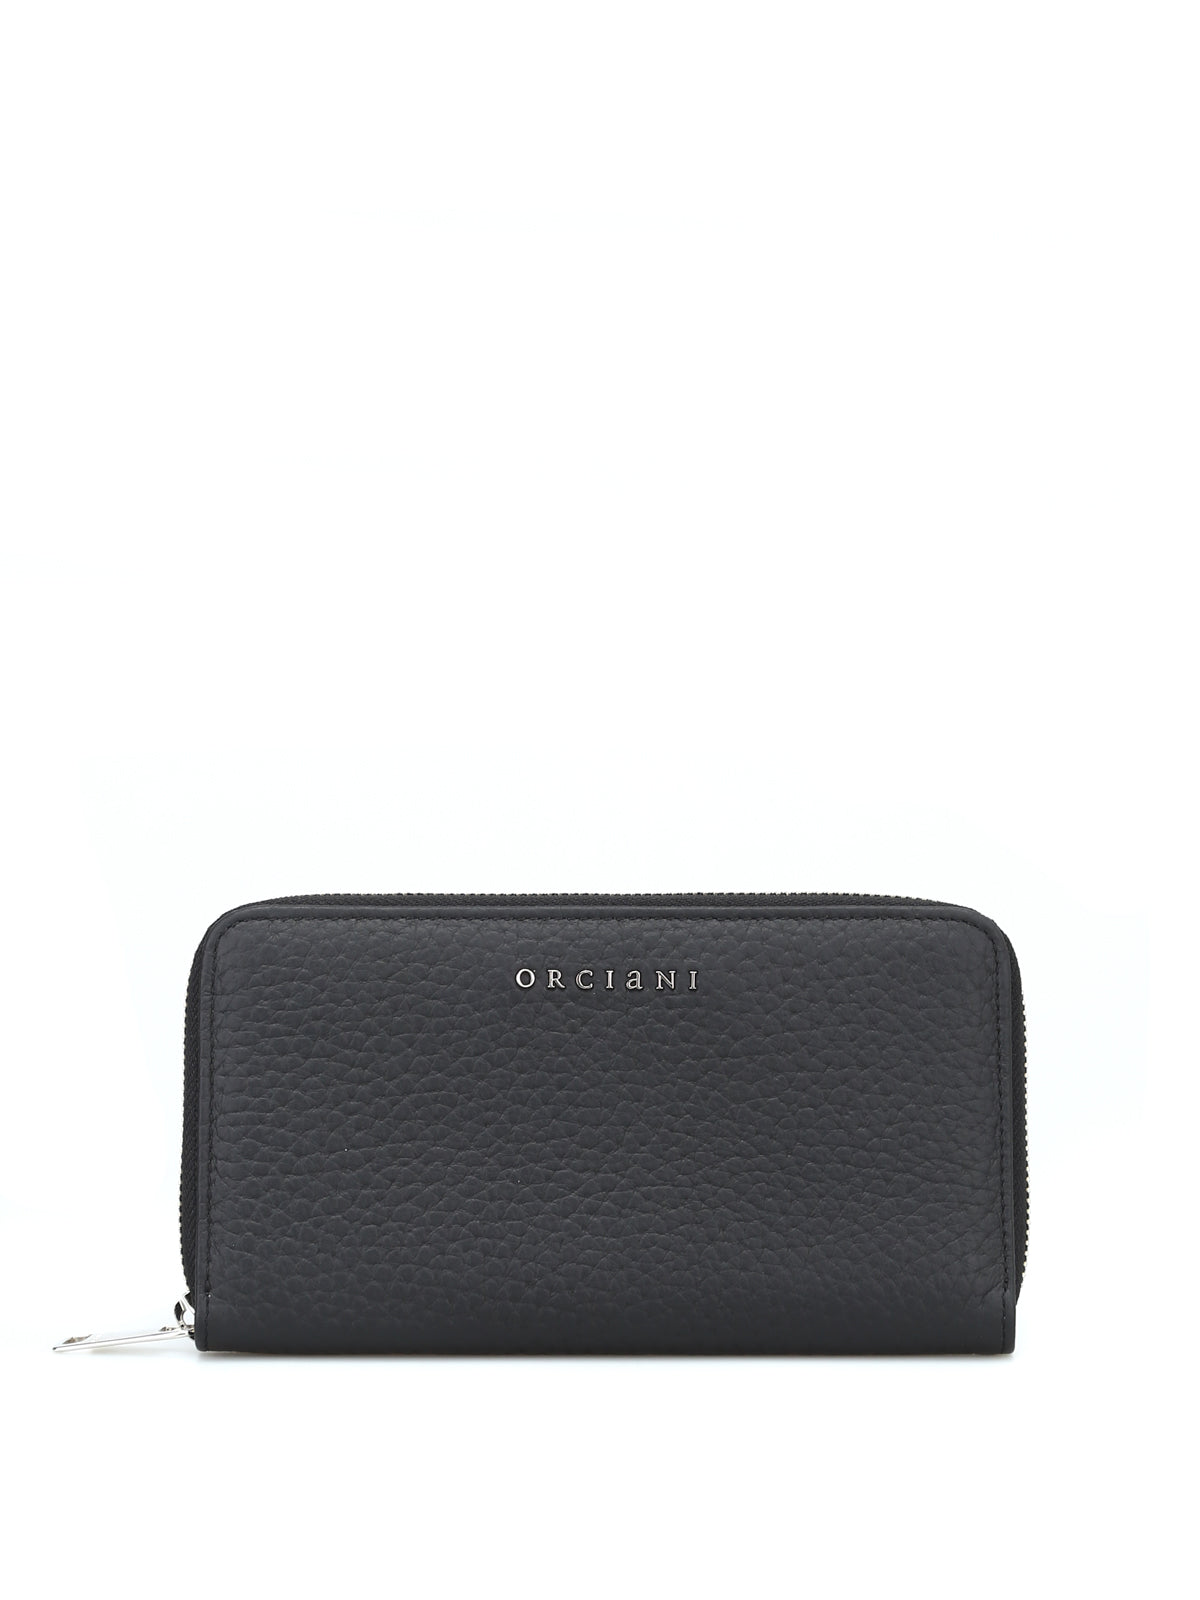 Orciani Large Zip Around Wallet Black Woman-1